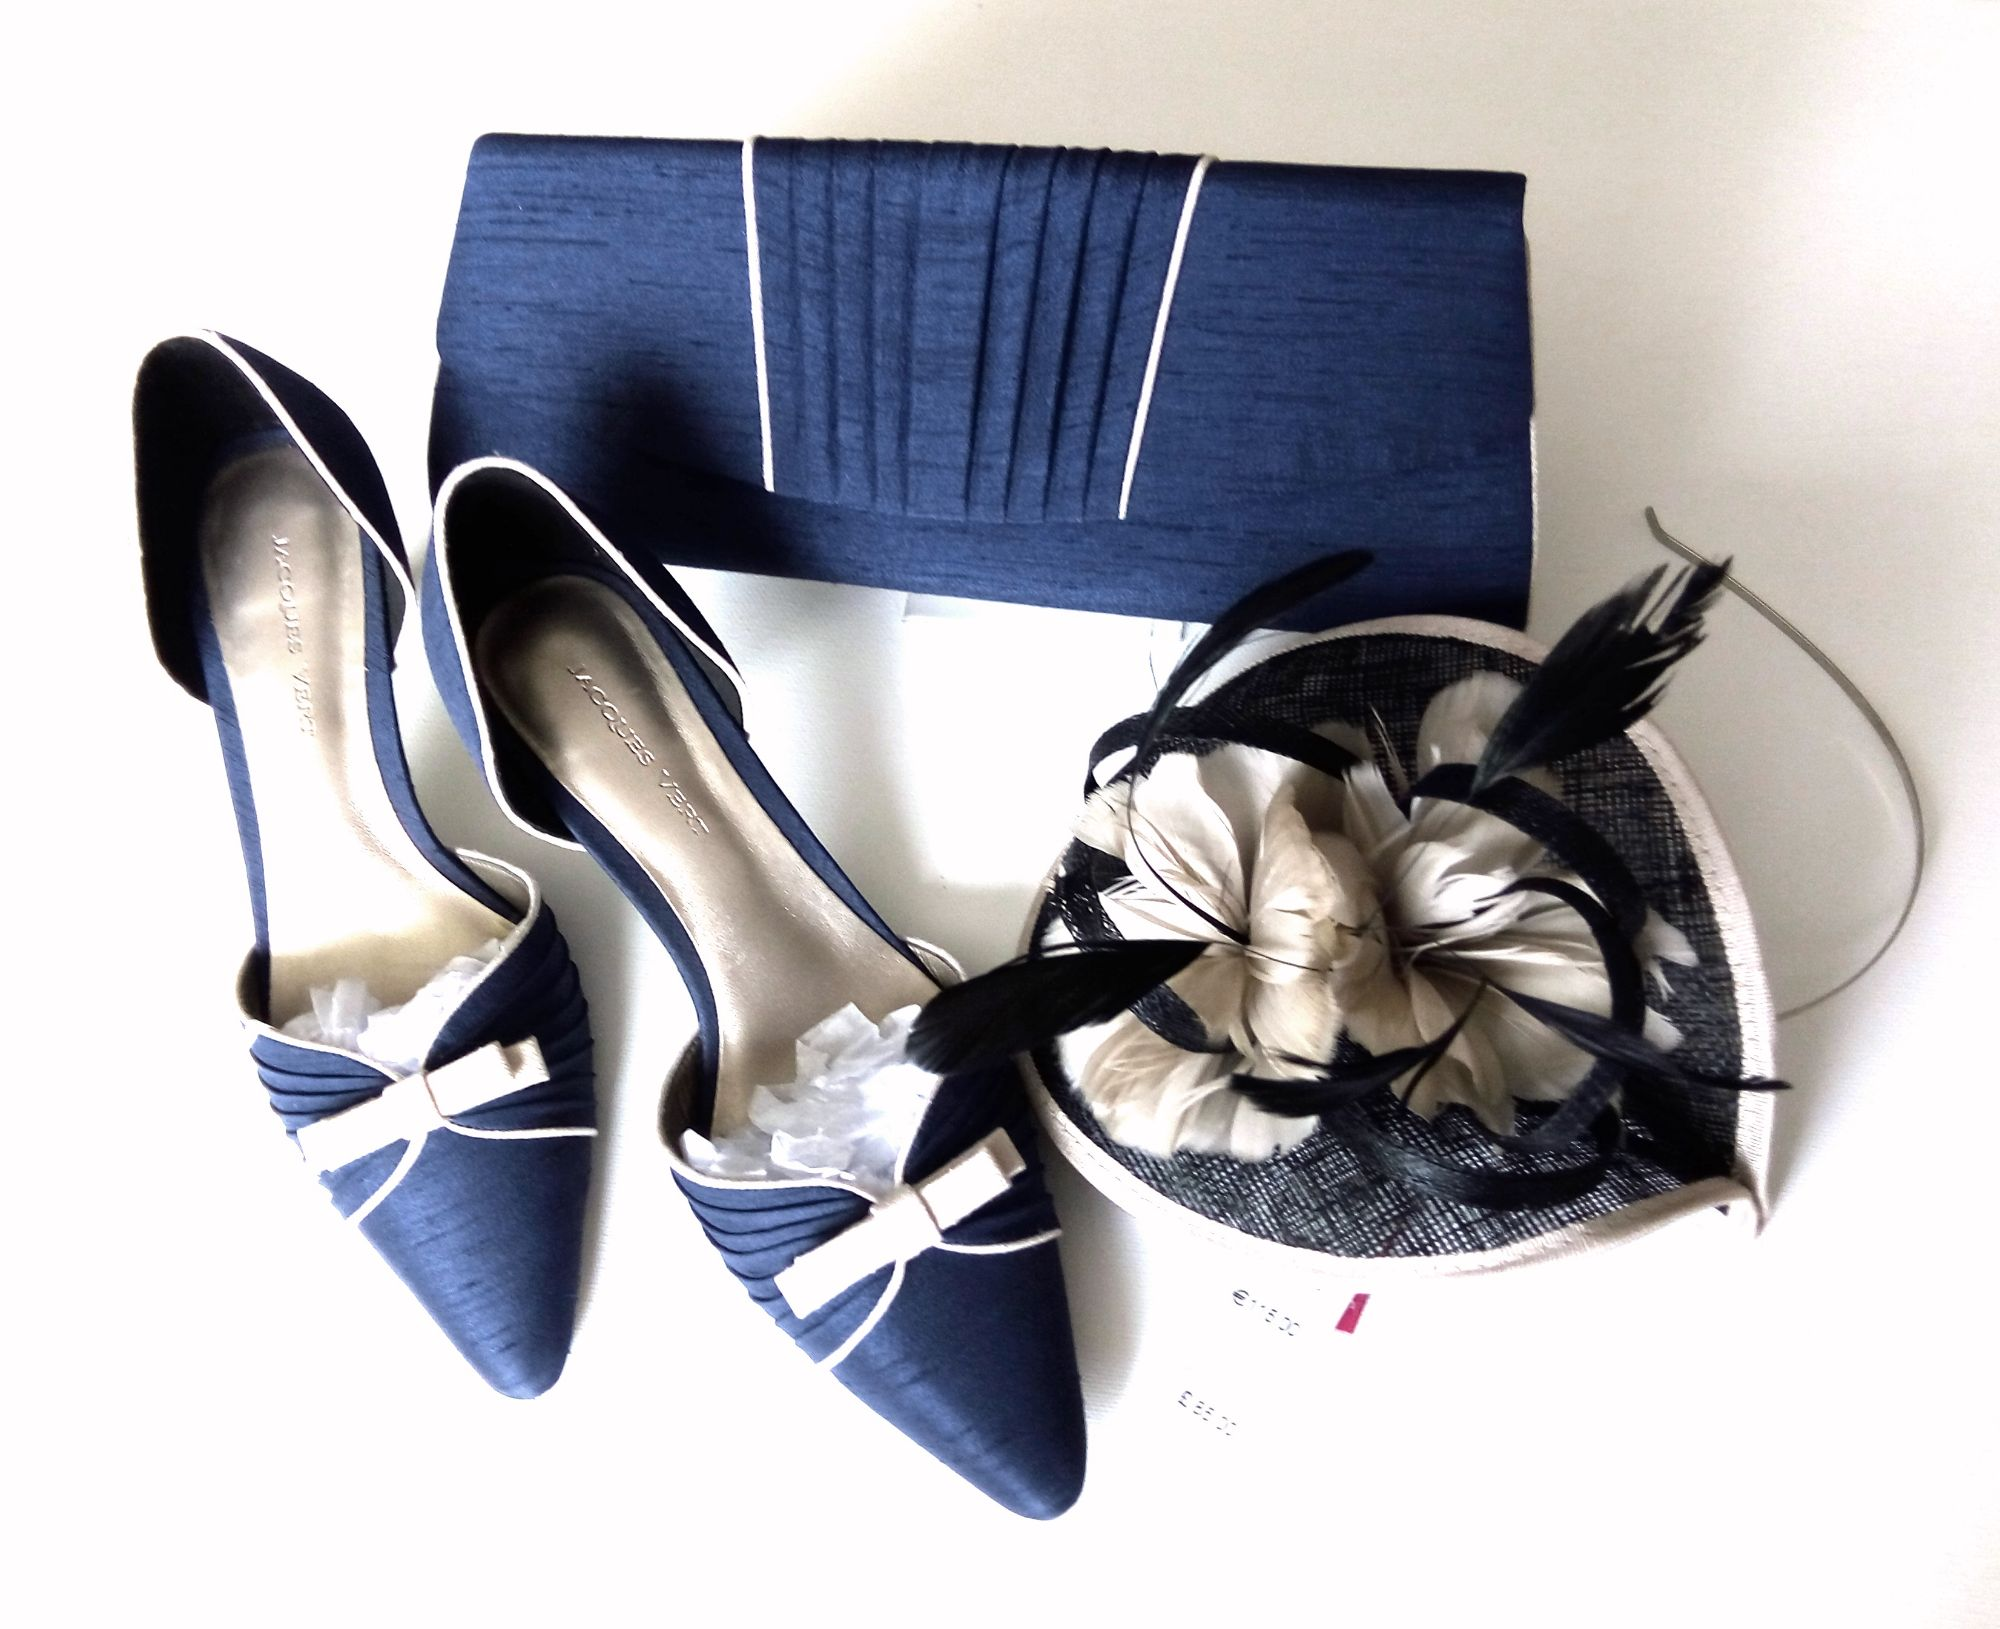 occasion shoes and matching bags